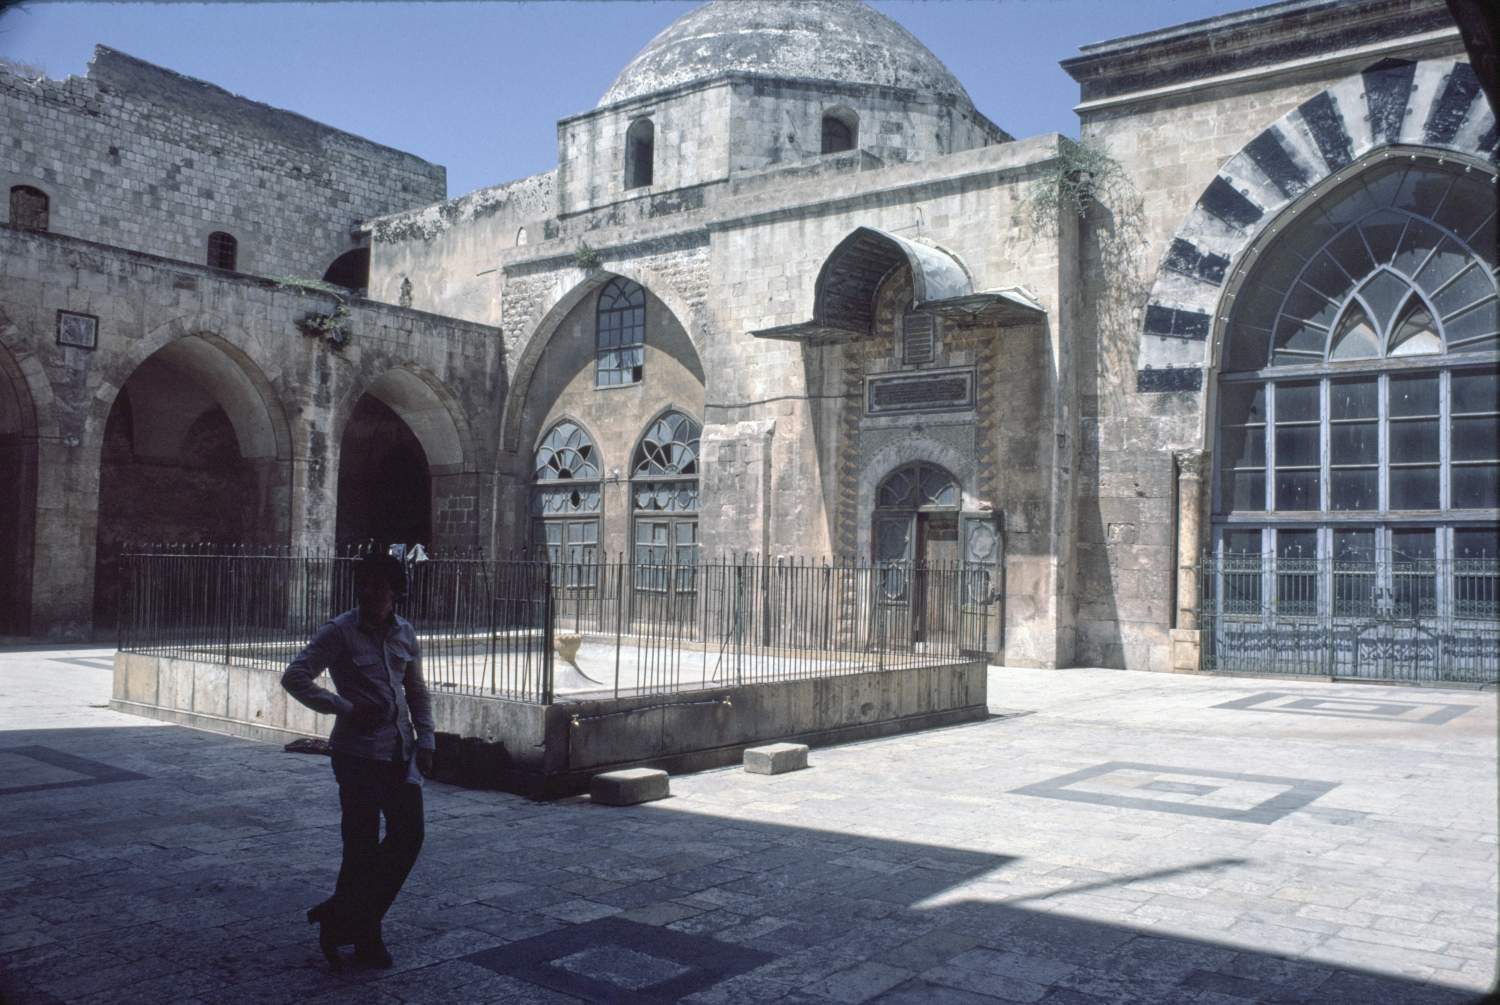 View of courtyard facing southwest. Entrance to iwan visible at right and double entrance to domed sanctuary at left.